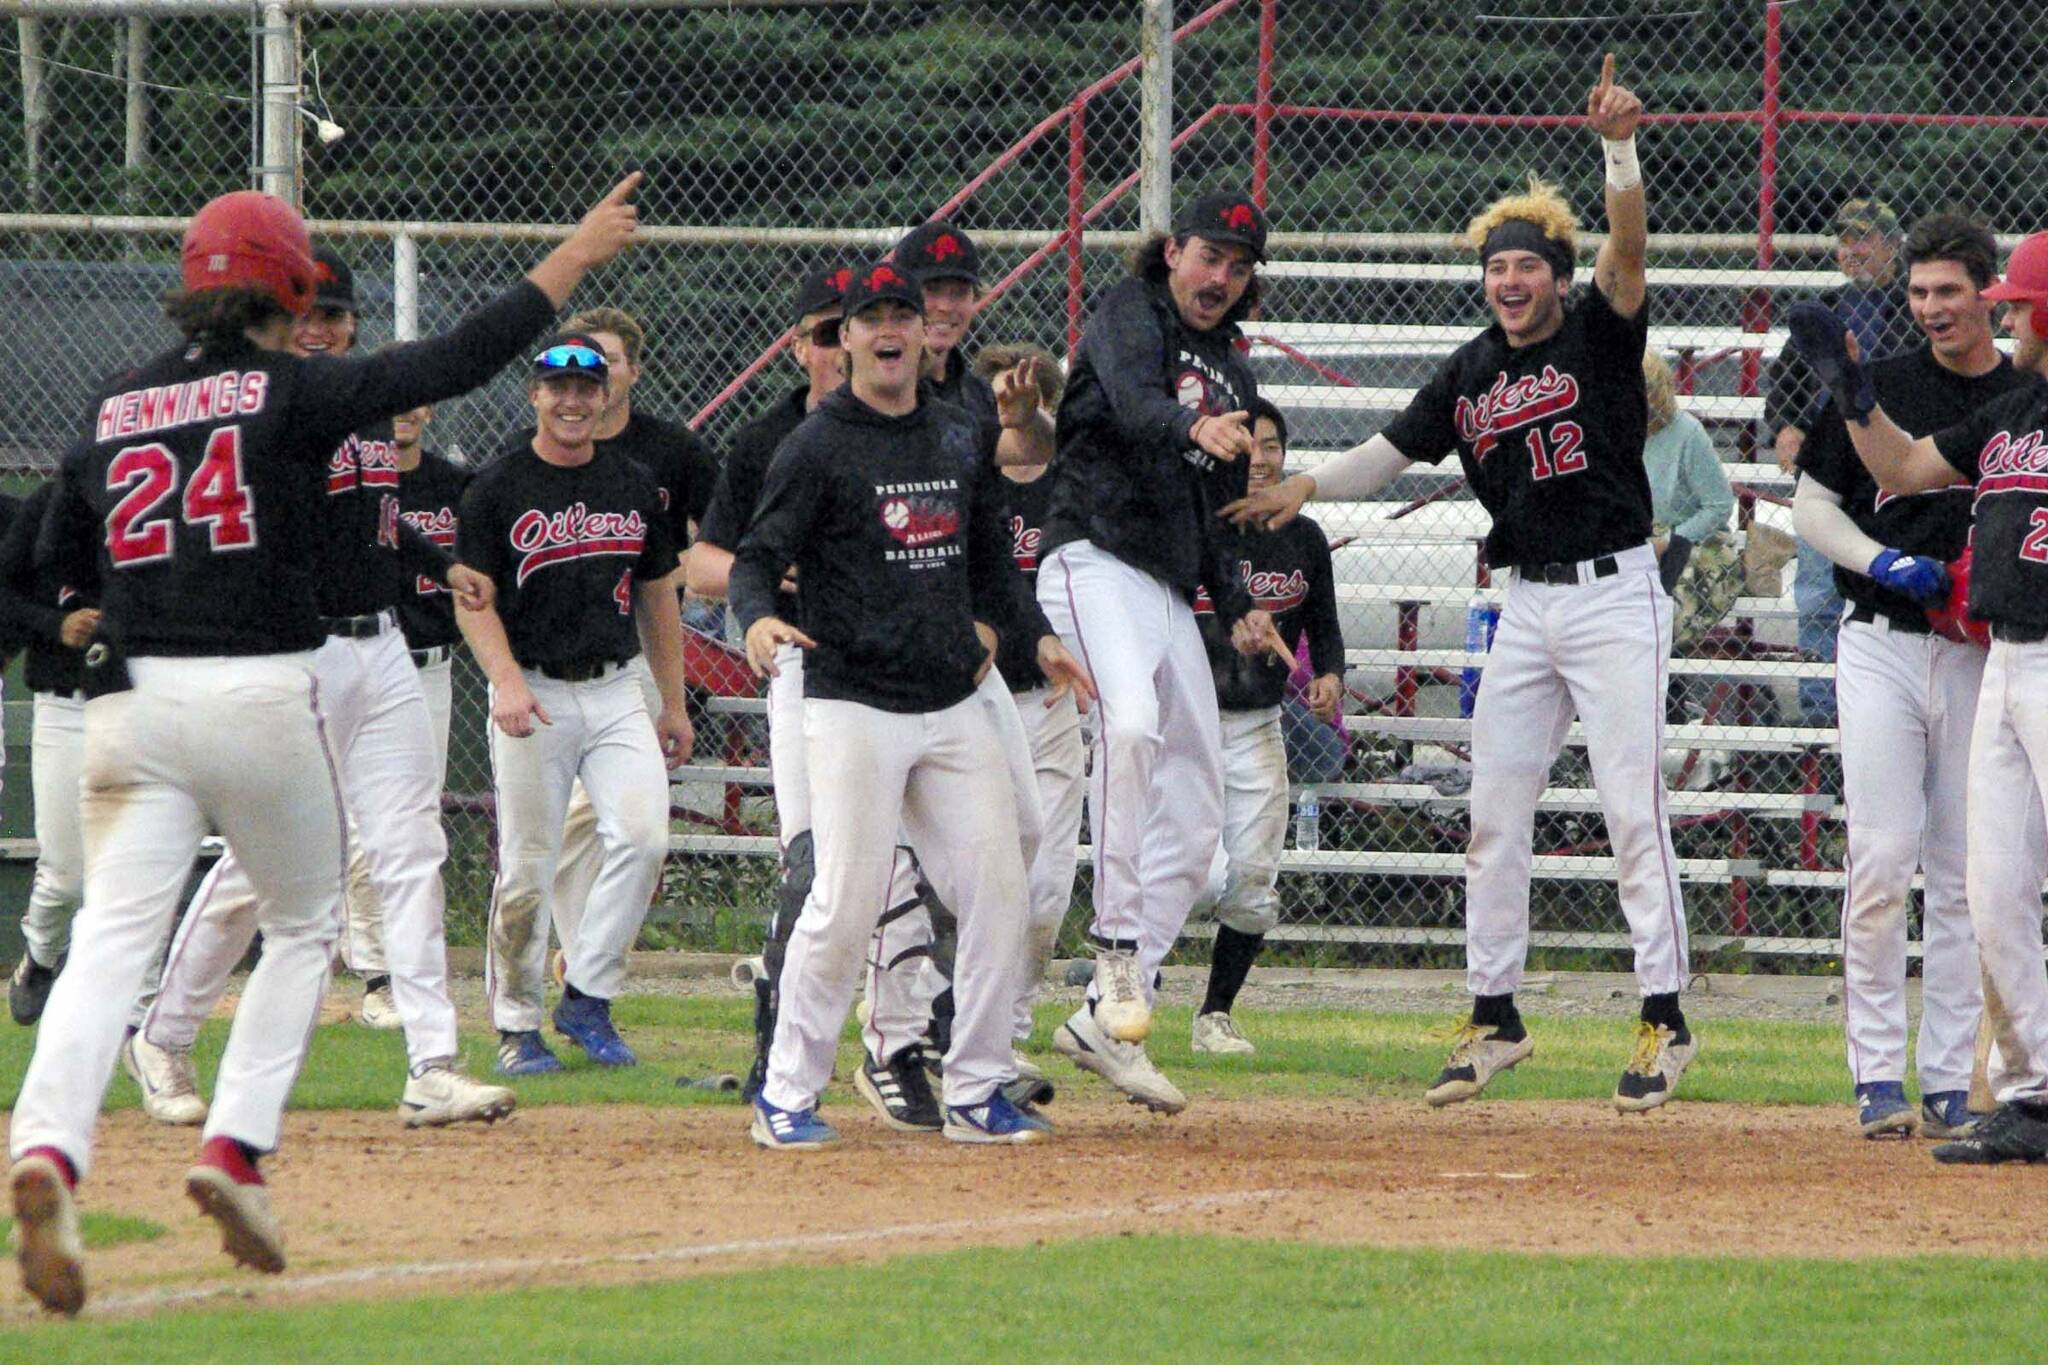 The Peninsula Oilers celebrate a home run by Noah Hennings against the Anchorage Bucs on Sunday, July 24, 2022, at Coral Seymour Memorial Park in Kenai, Alaska. Hennings hit a two-run homer in the bottom of the seventh to invoke the mercy rule in a 13-3 victory. (Photo by Jeff Helminiak/Peninsula Clarion)